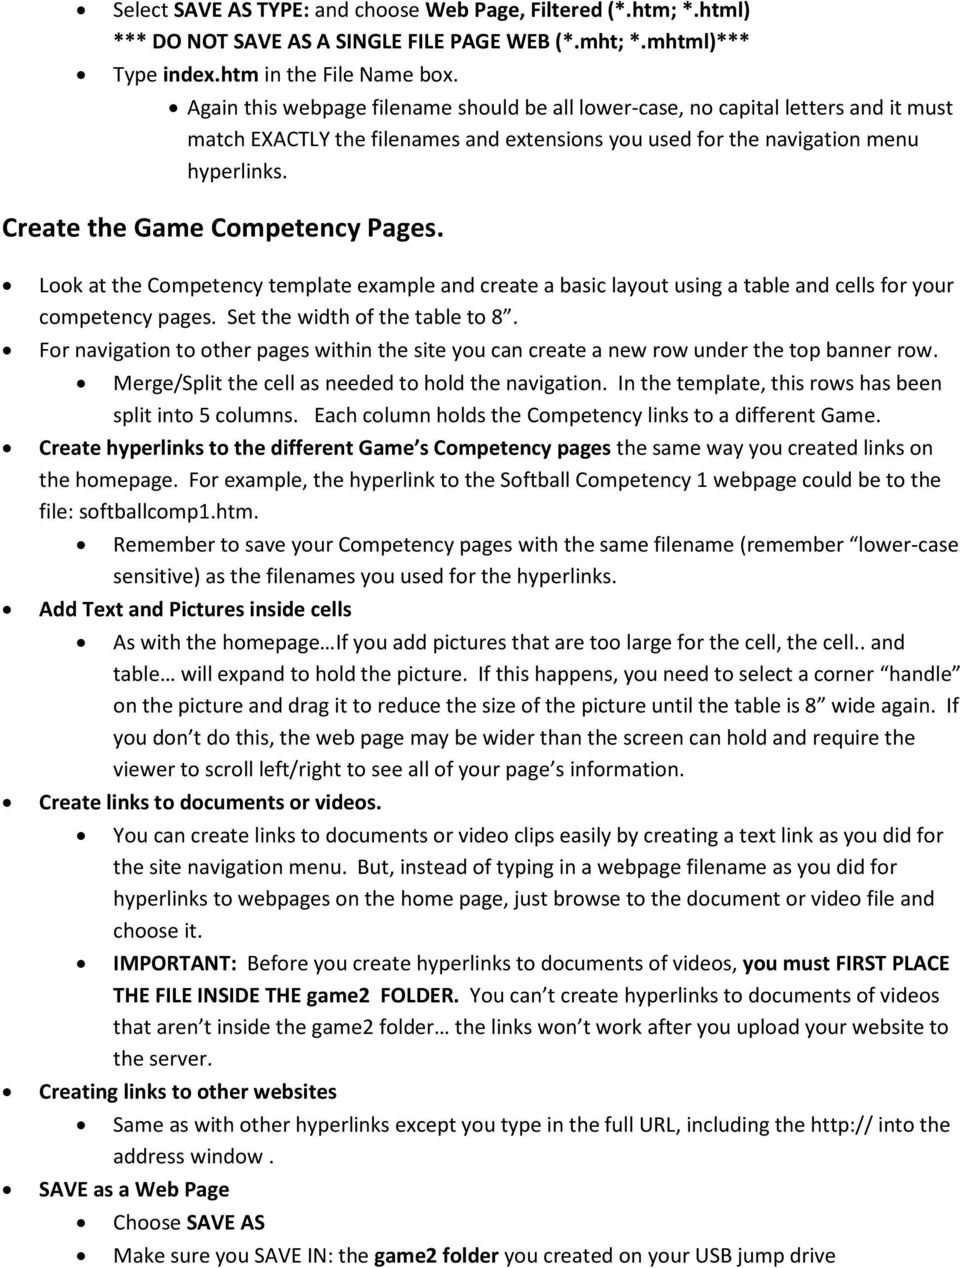 Create the Game Competency Pages. Look at the Competency template example and create a basic layout using a table and cells for your competency pages. Set the width of the table to 8.